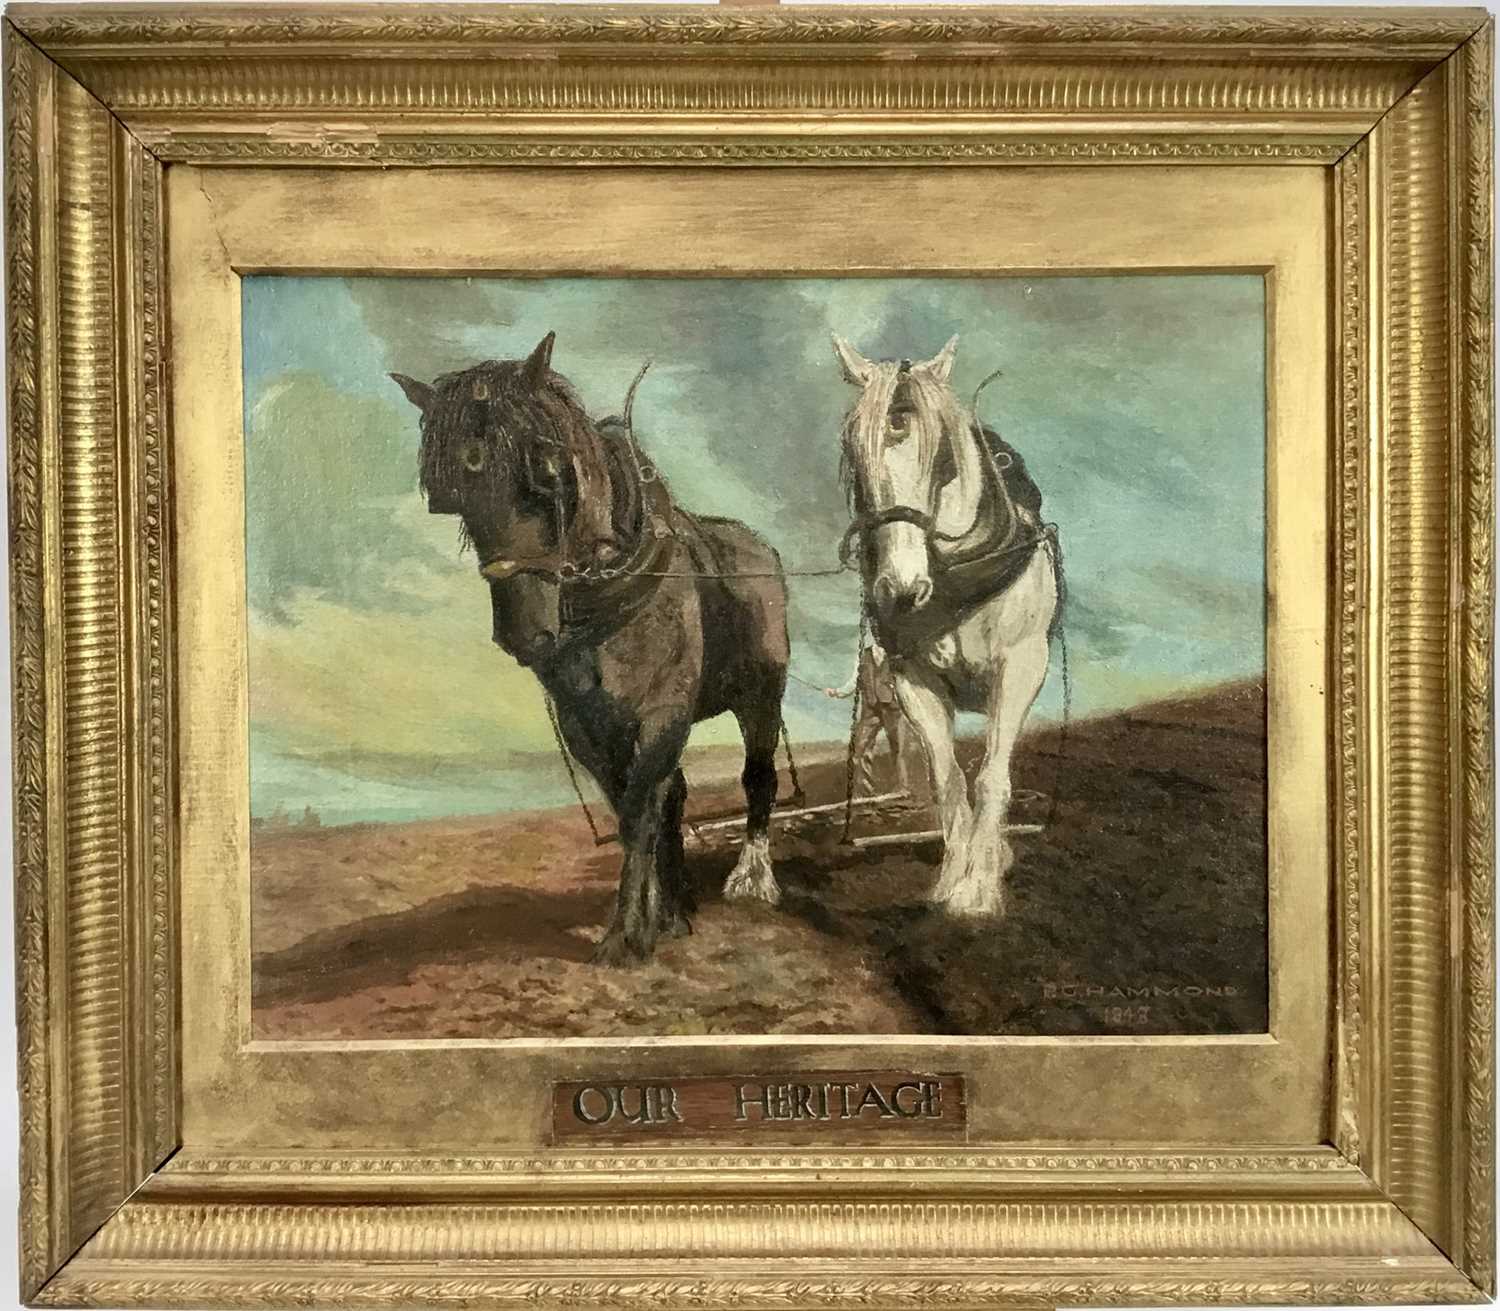 Lot 30 - English school oil on canvas - "Our Heritage", two shire horses pulling a rake, signed and dated P G Hammond 1948, 33 x 44cm